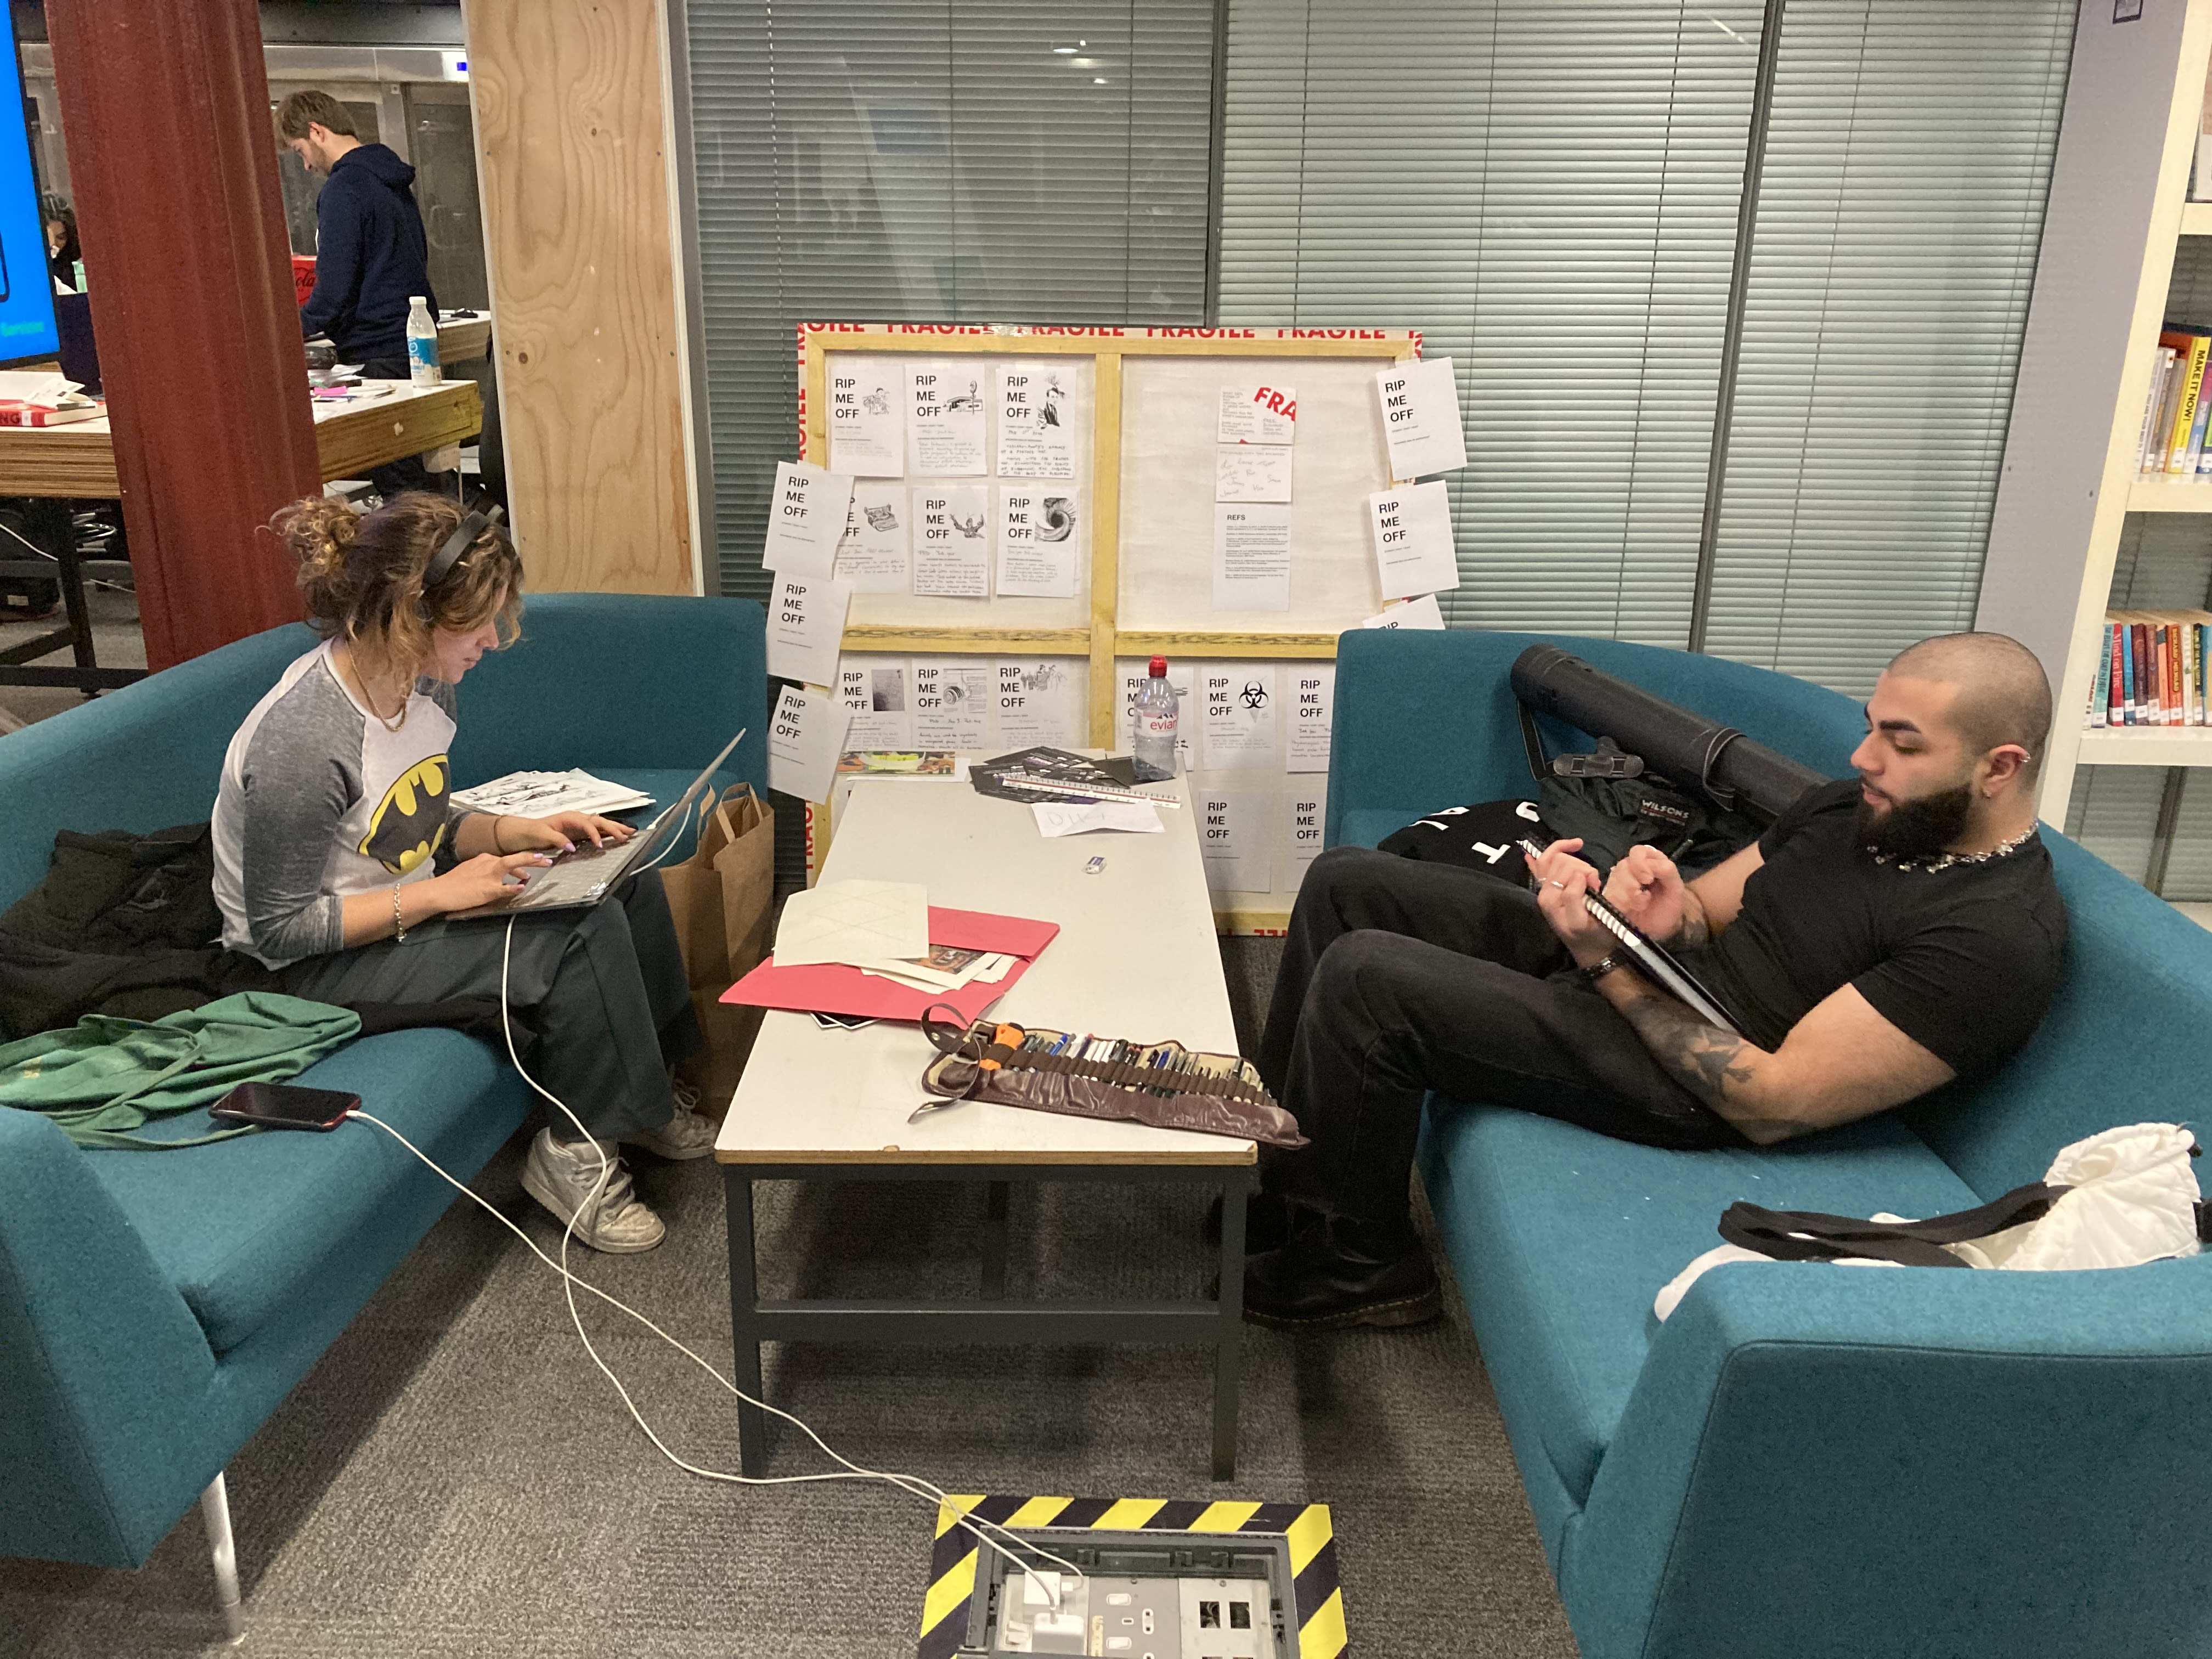 Two people sitting on opposite sofas working on laptops, with a table in the middle.